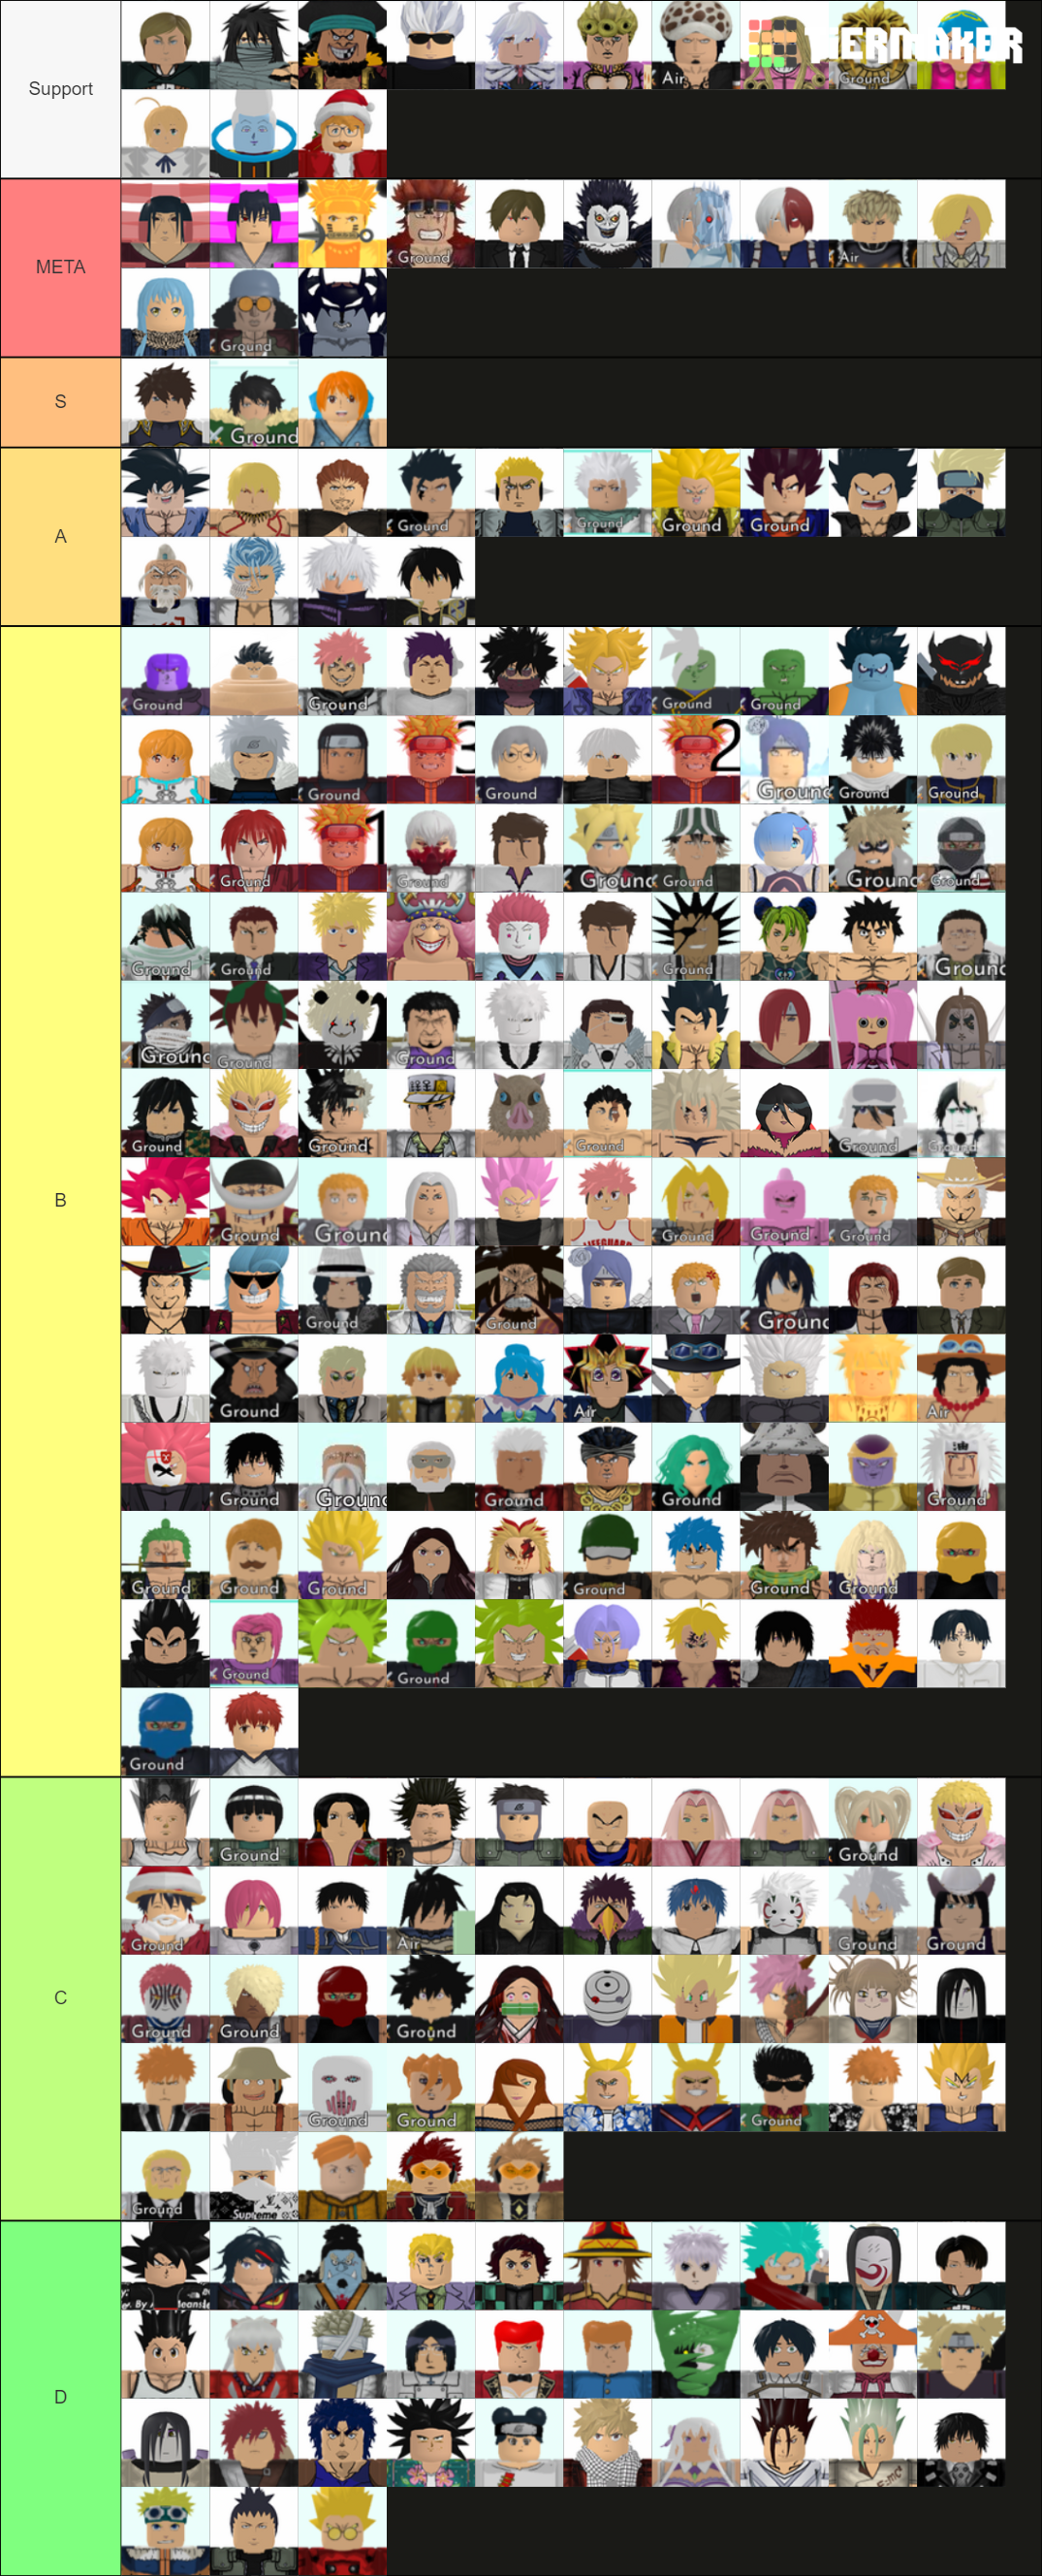 Create a Roblox All Star Tower Defense Tier List - TierMaker